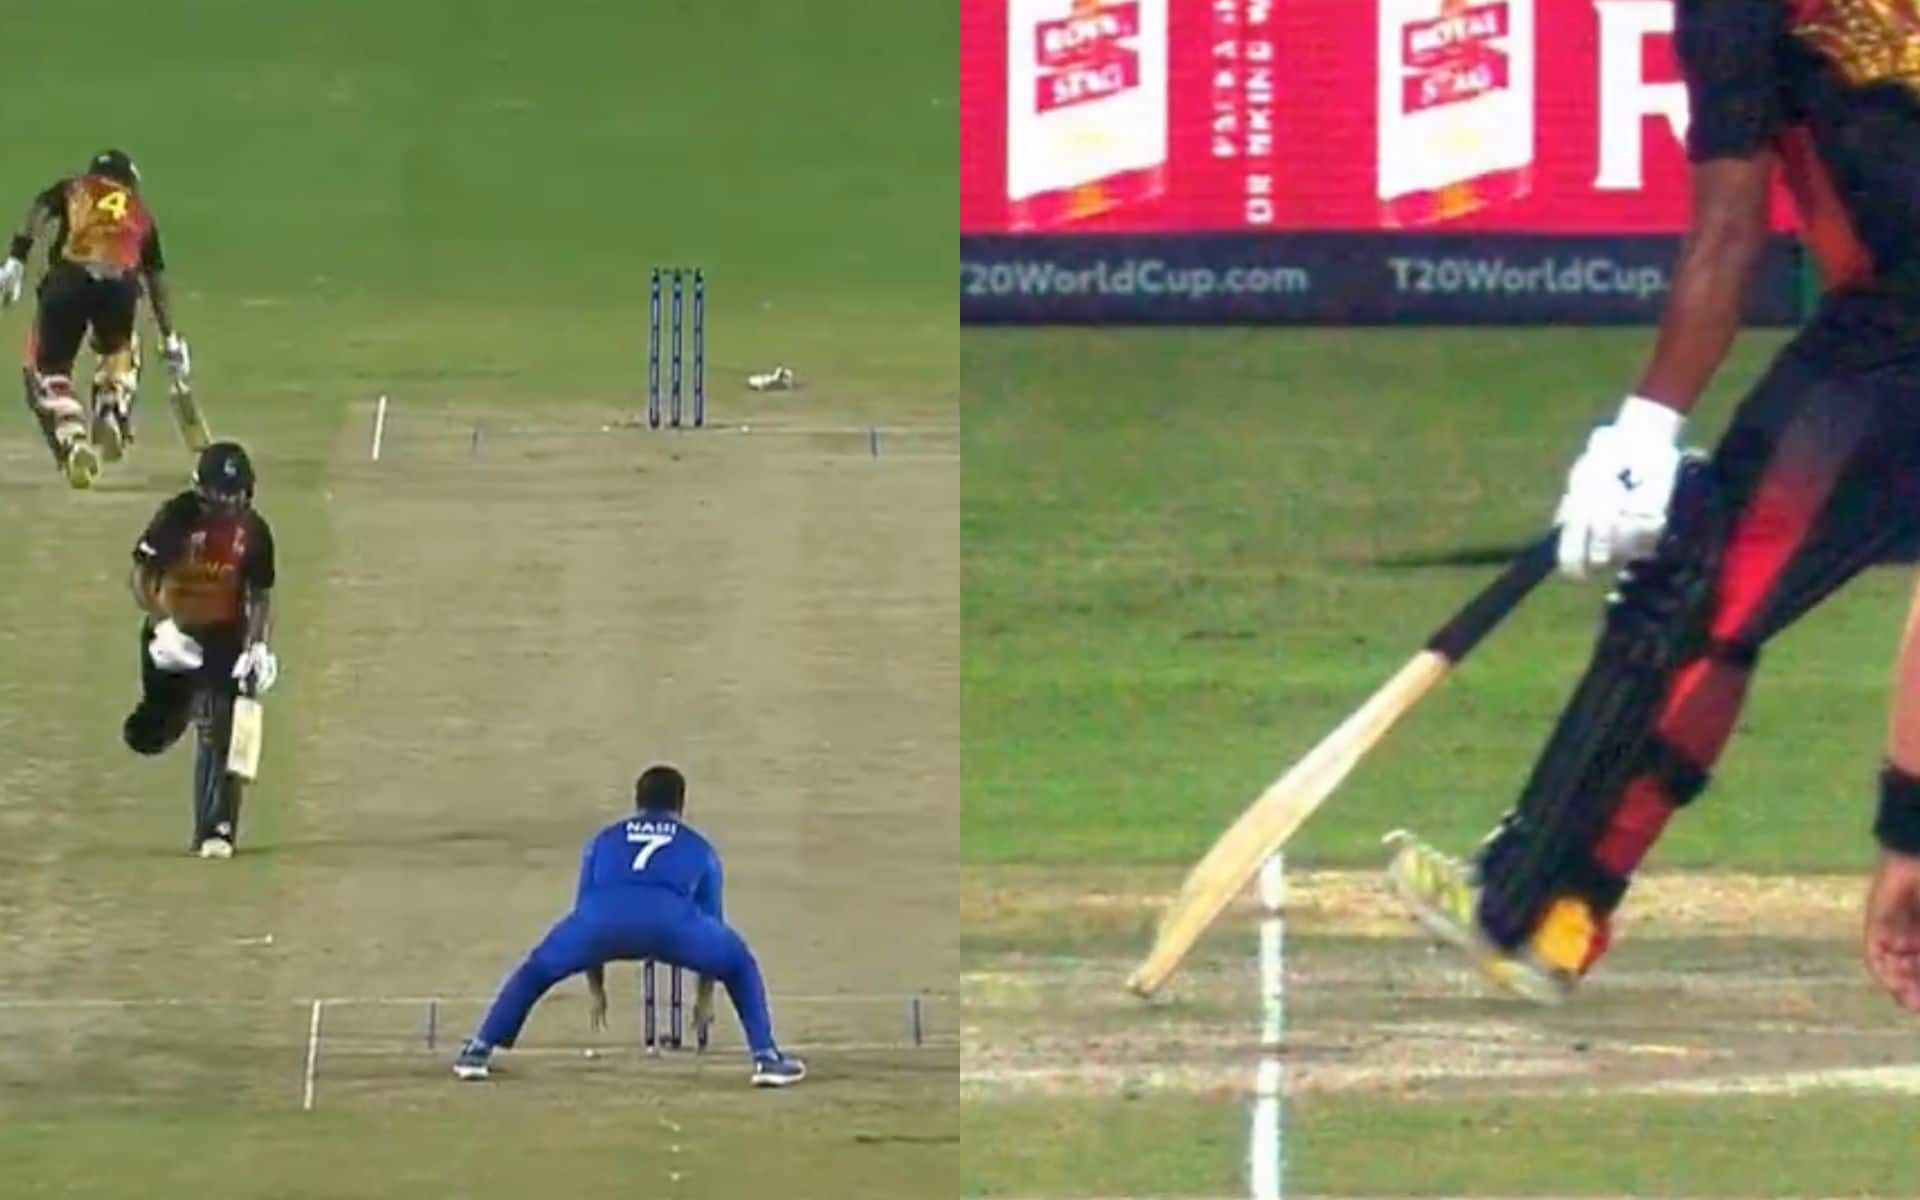 Assad Vala's half-hearted attempt resulted in a crucial run-out (x)